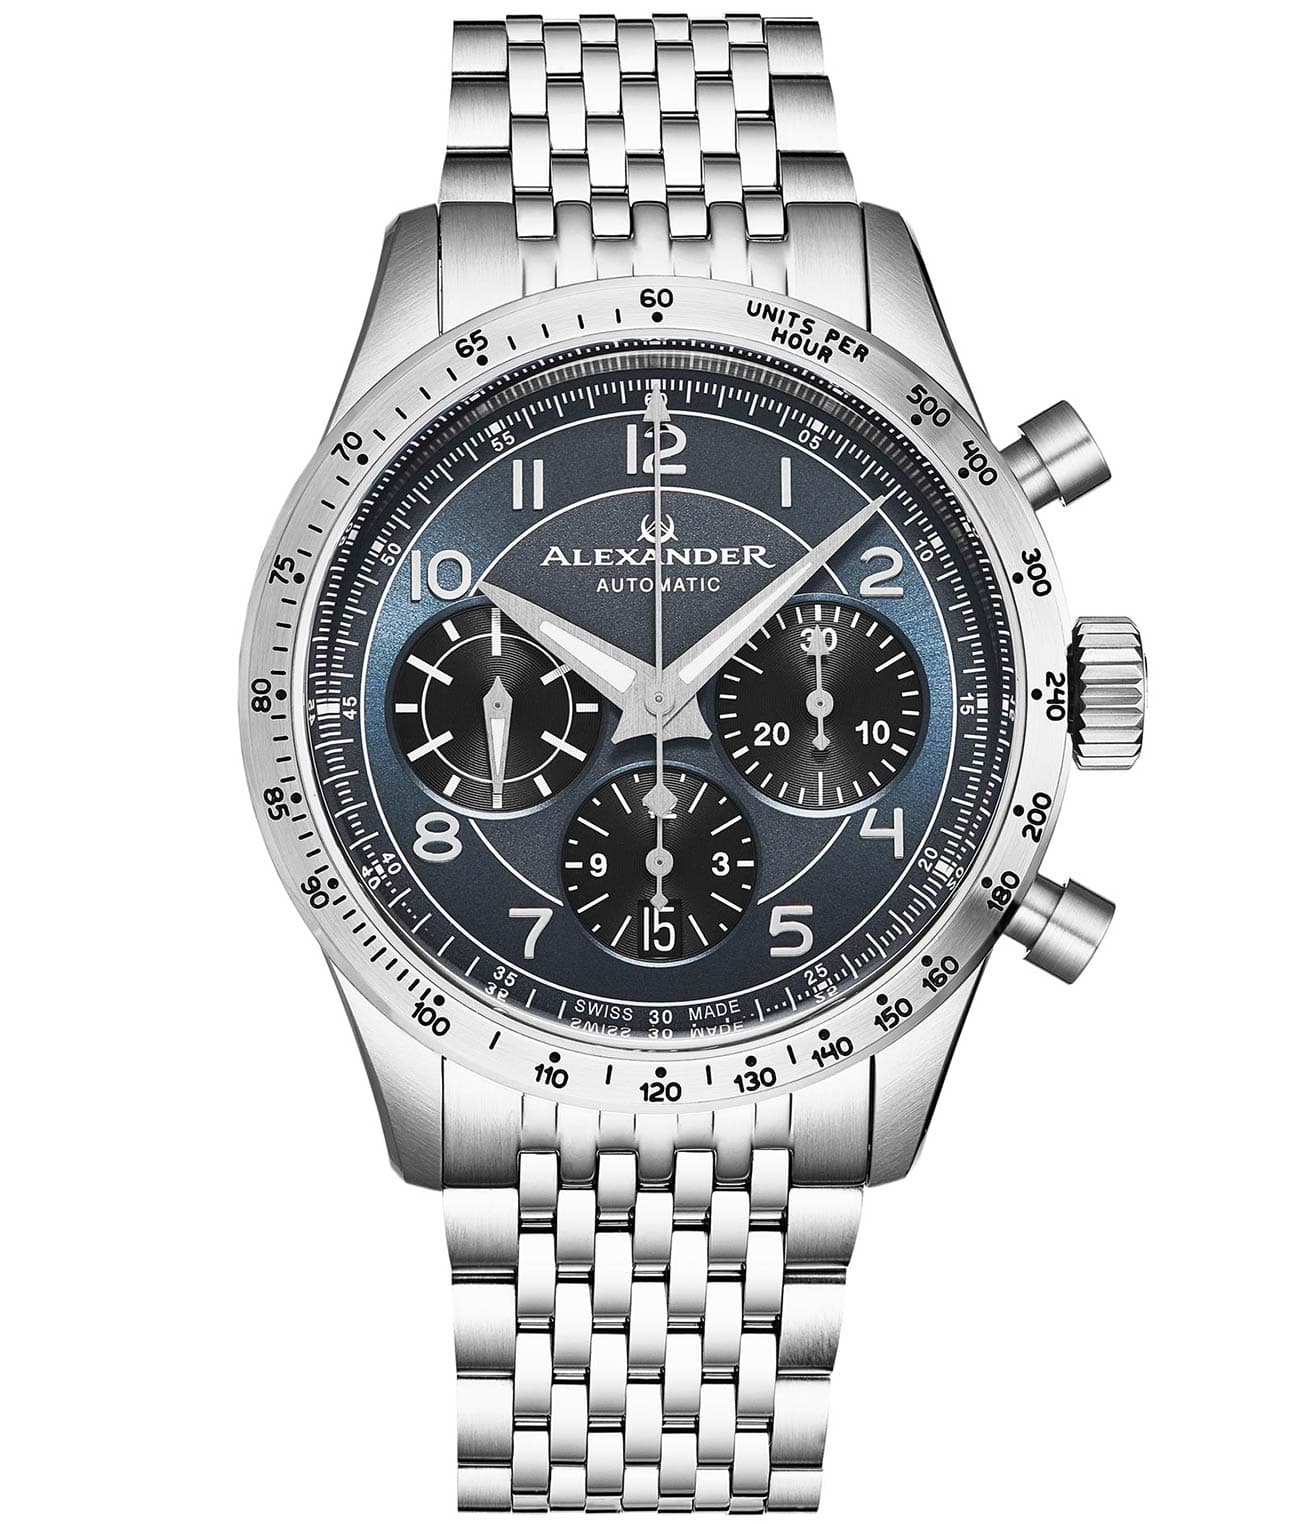 Swiss Made Limited Edition (7753) Chronograph